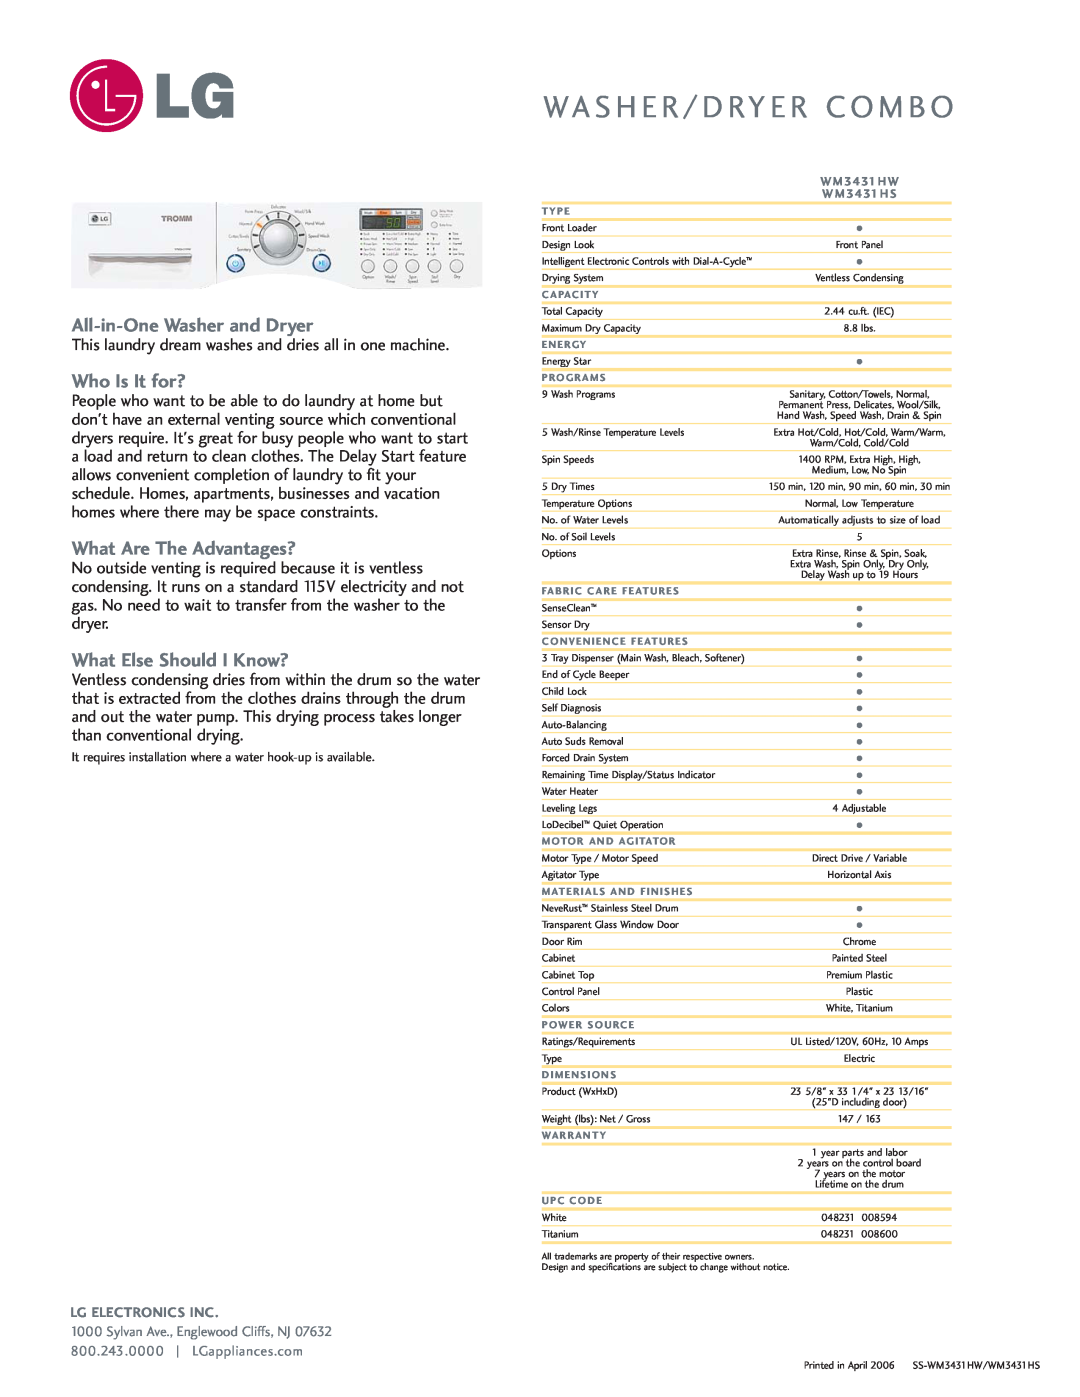 LG Electronics WM3431HW All-in-One Washer and Dryer, Who Is It for?, What Are The Advantages?, What Else Should I Know? 